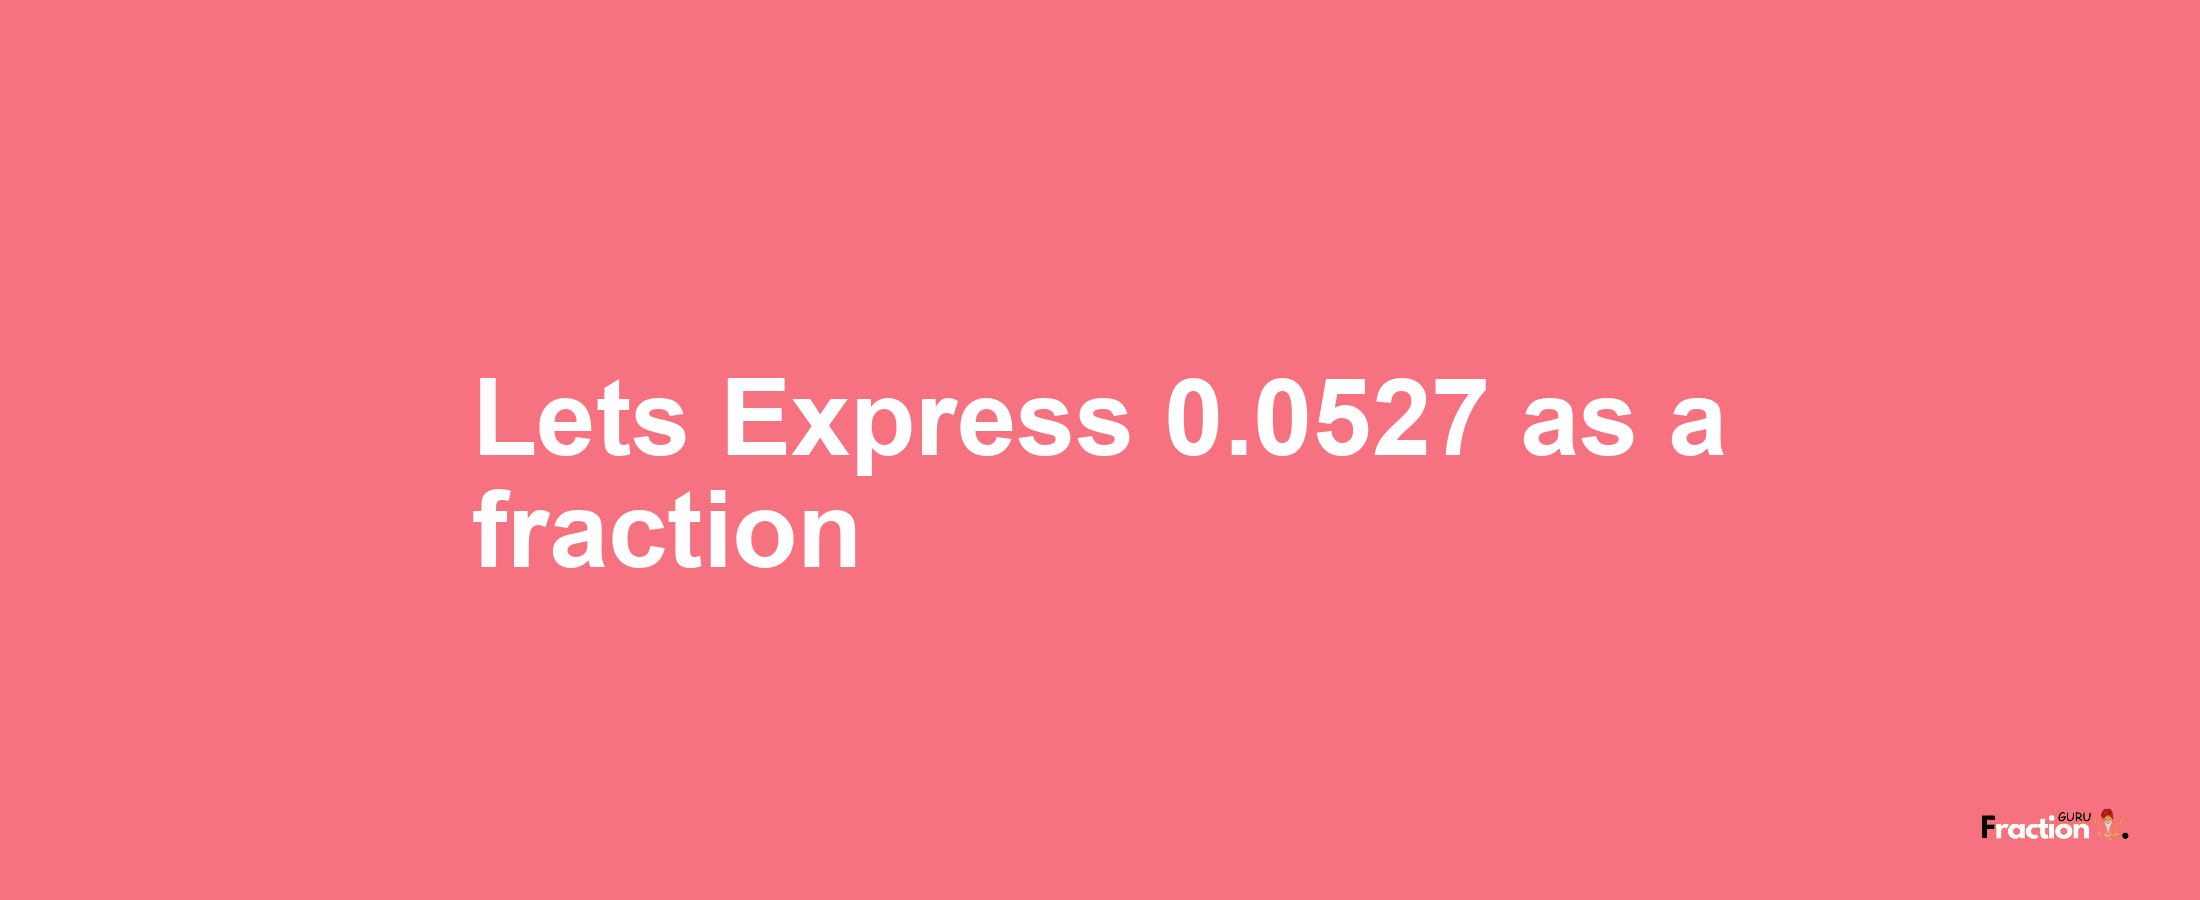 Lets Express 0.0527 as afraction